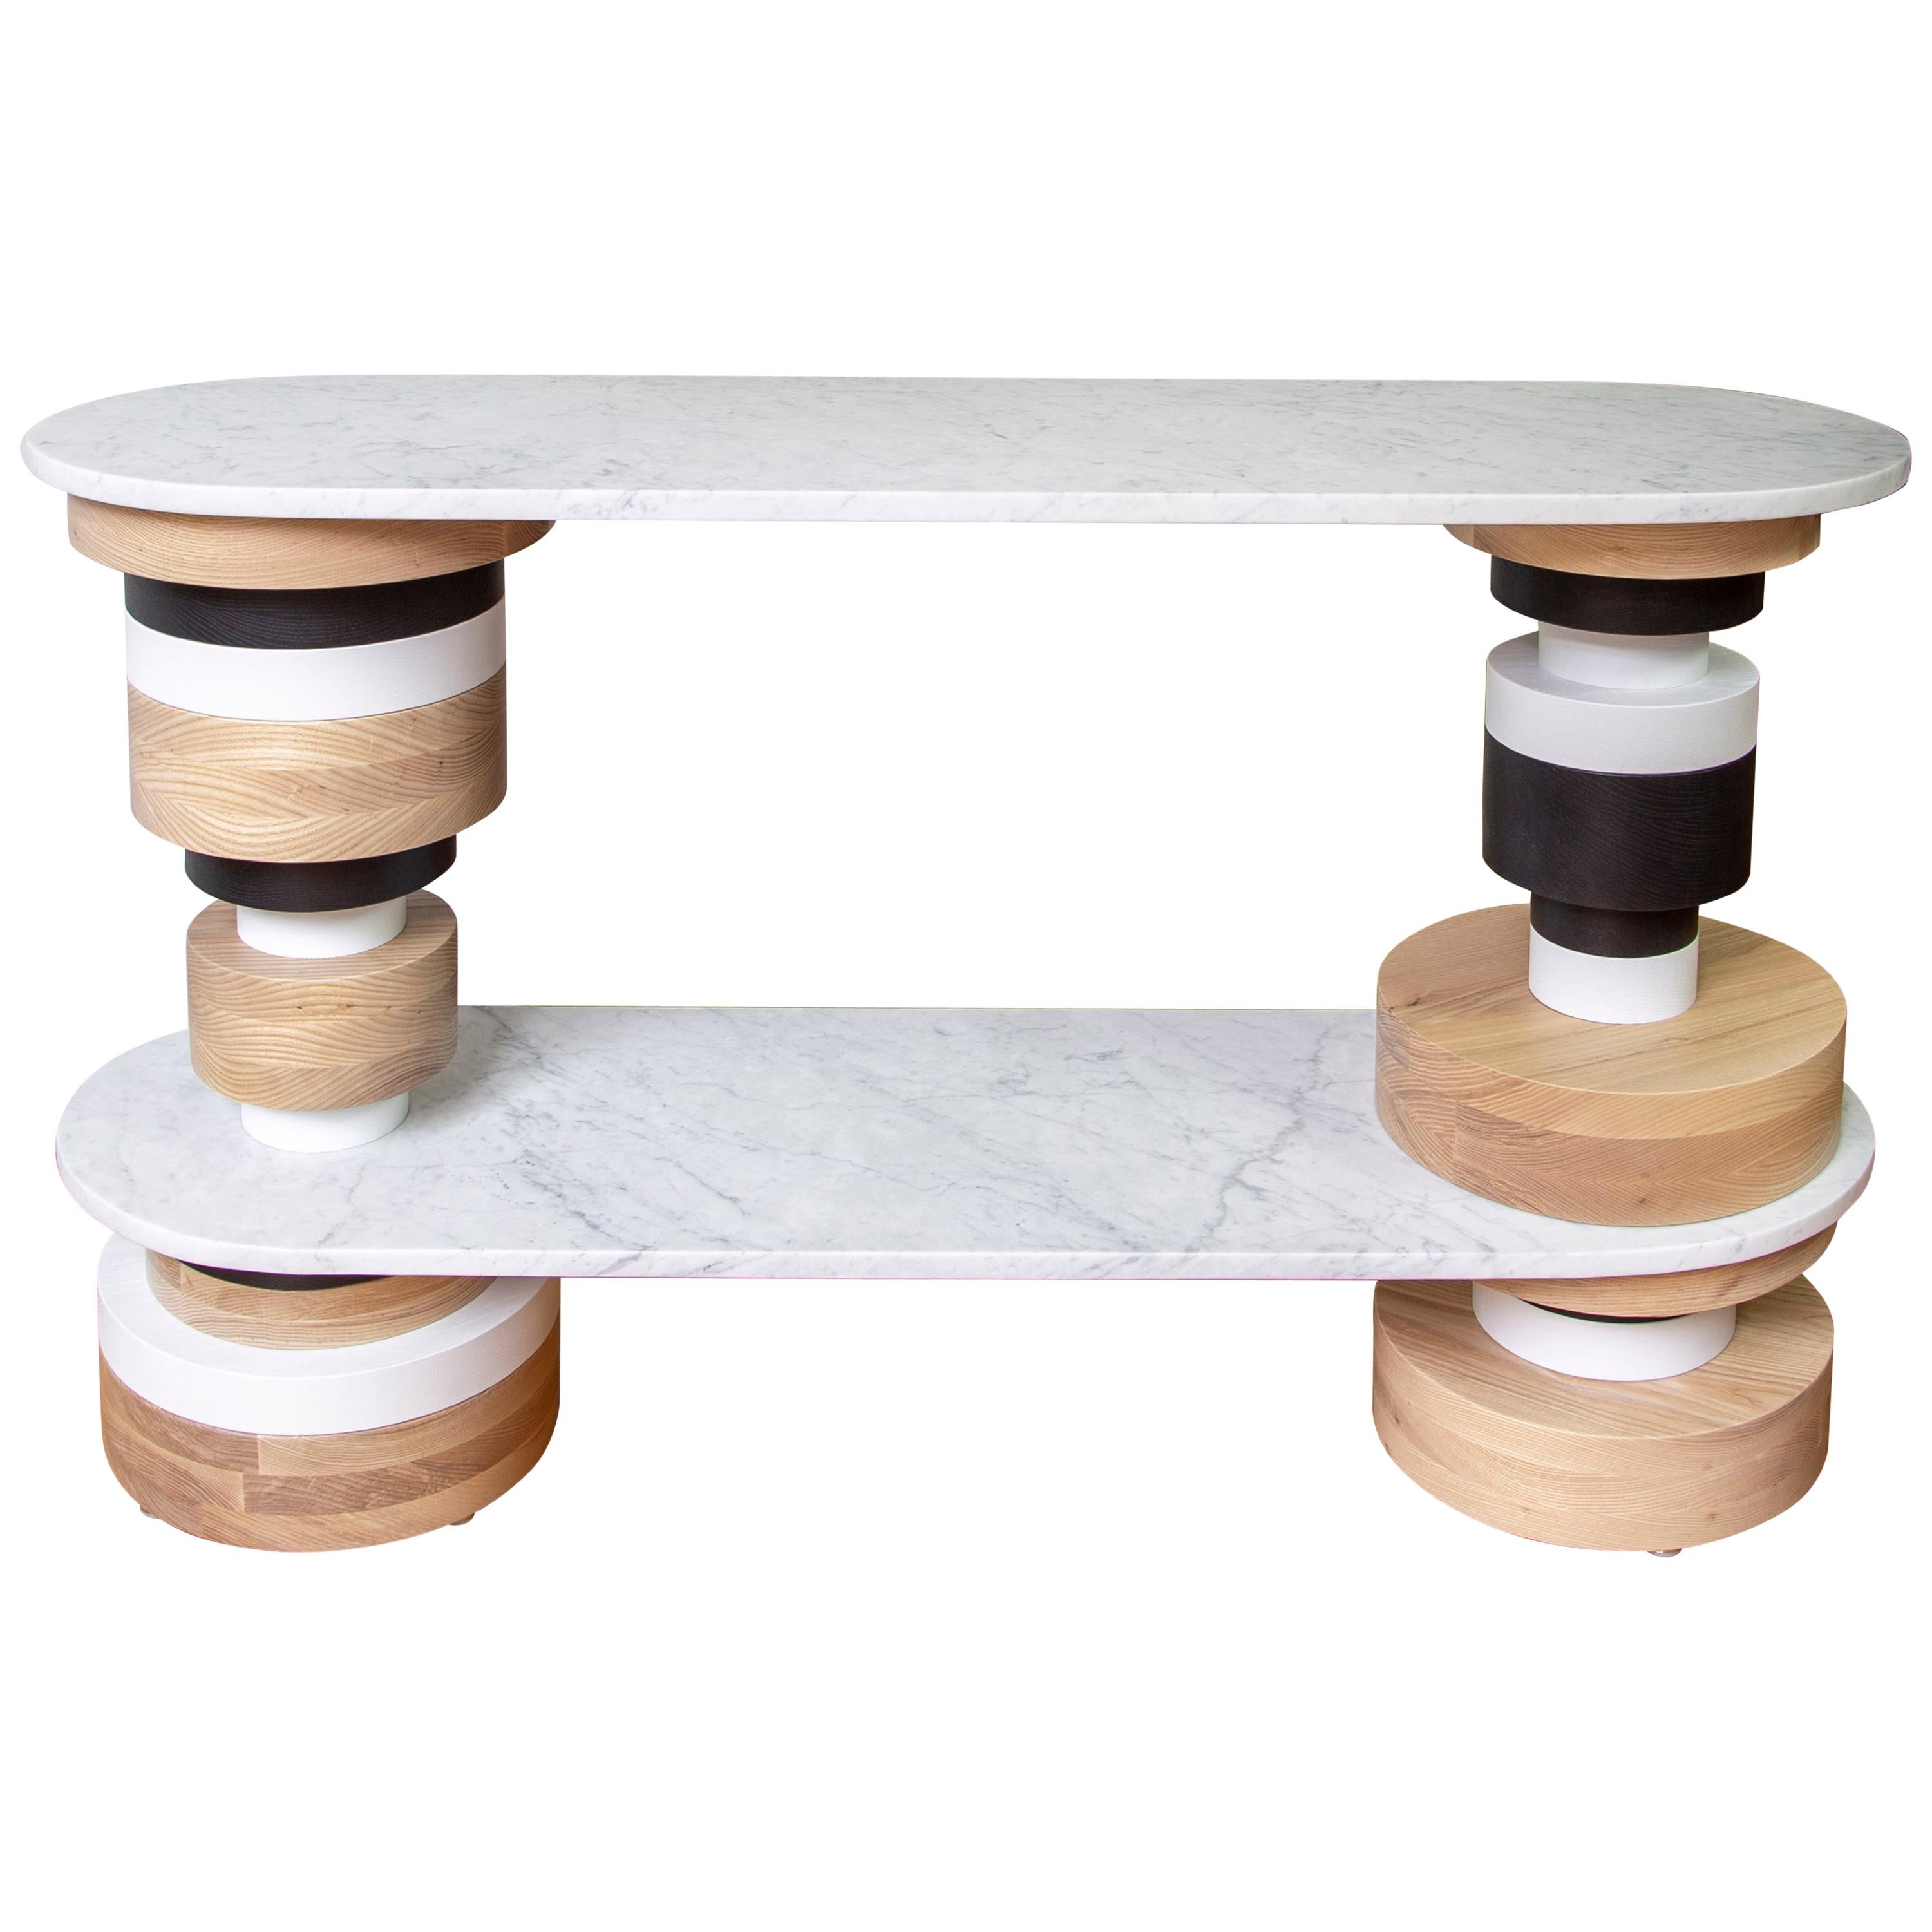 Customizable Sass Console Table from Souda, White Marble Top, Entryway Table